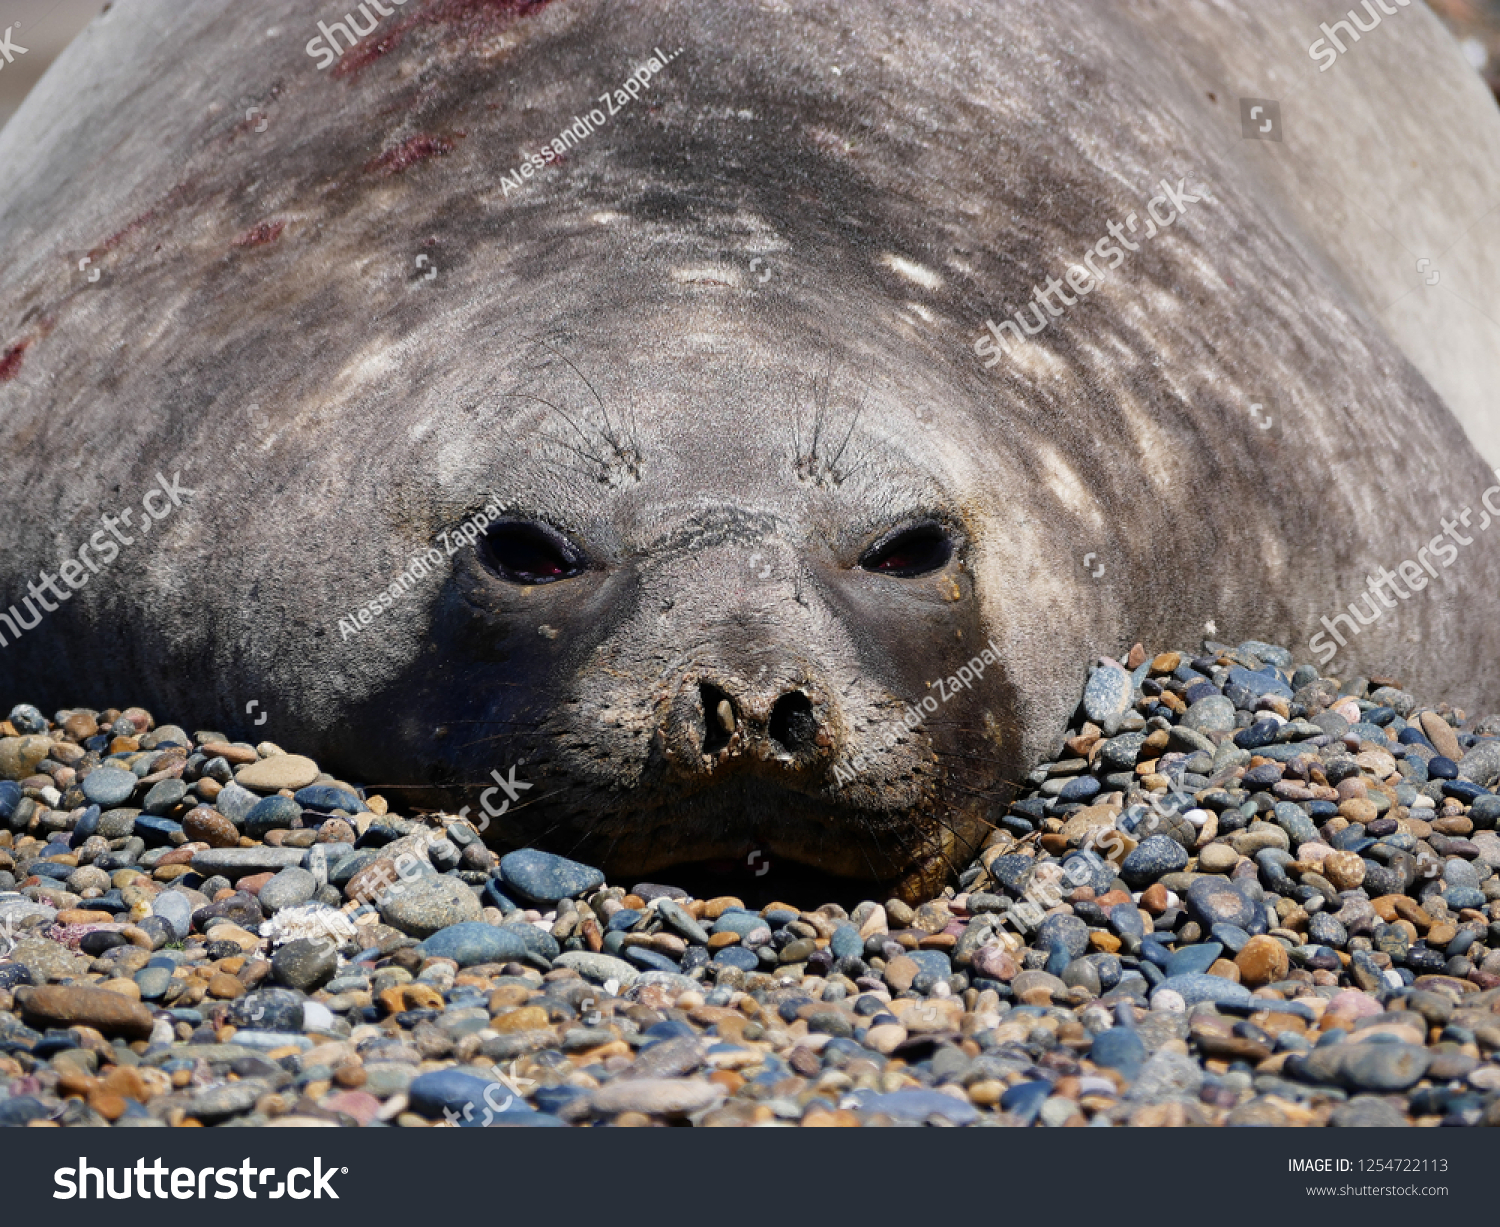 Sea elephants rest on the beach during the low tide, on the atlantic coast near Puerto Madryn. Big marine mammals of Patagonia. #1254722113